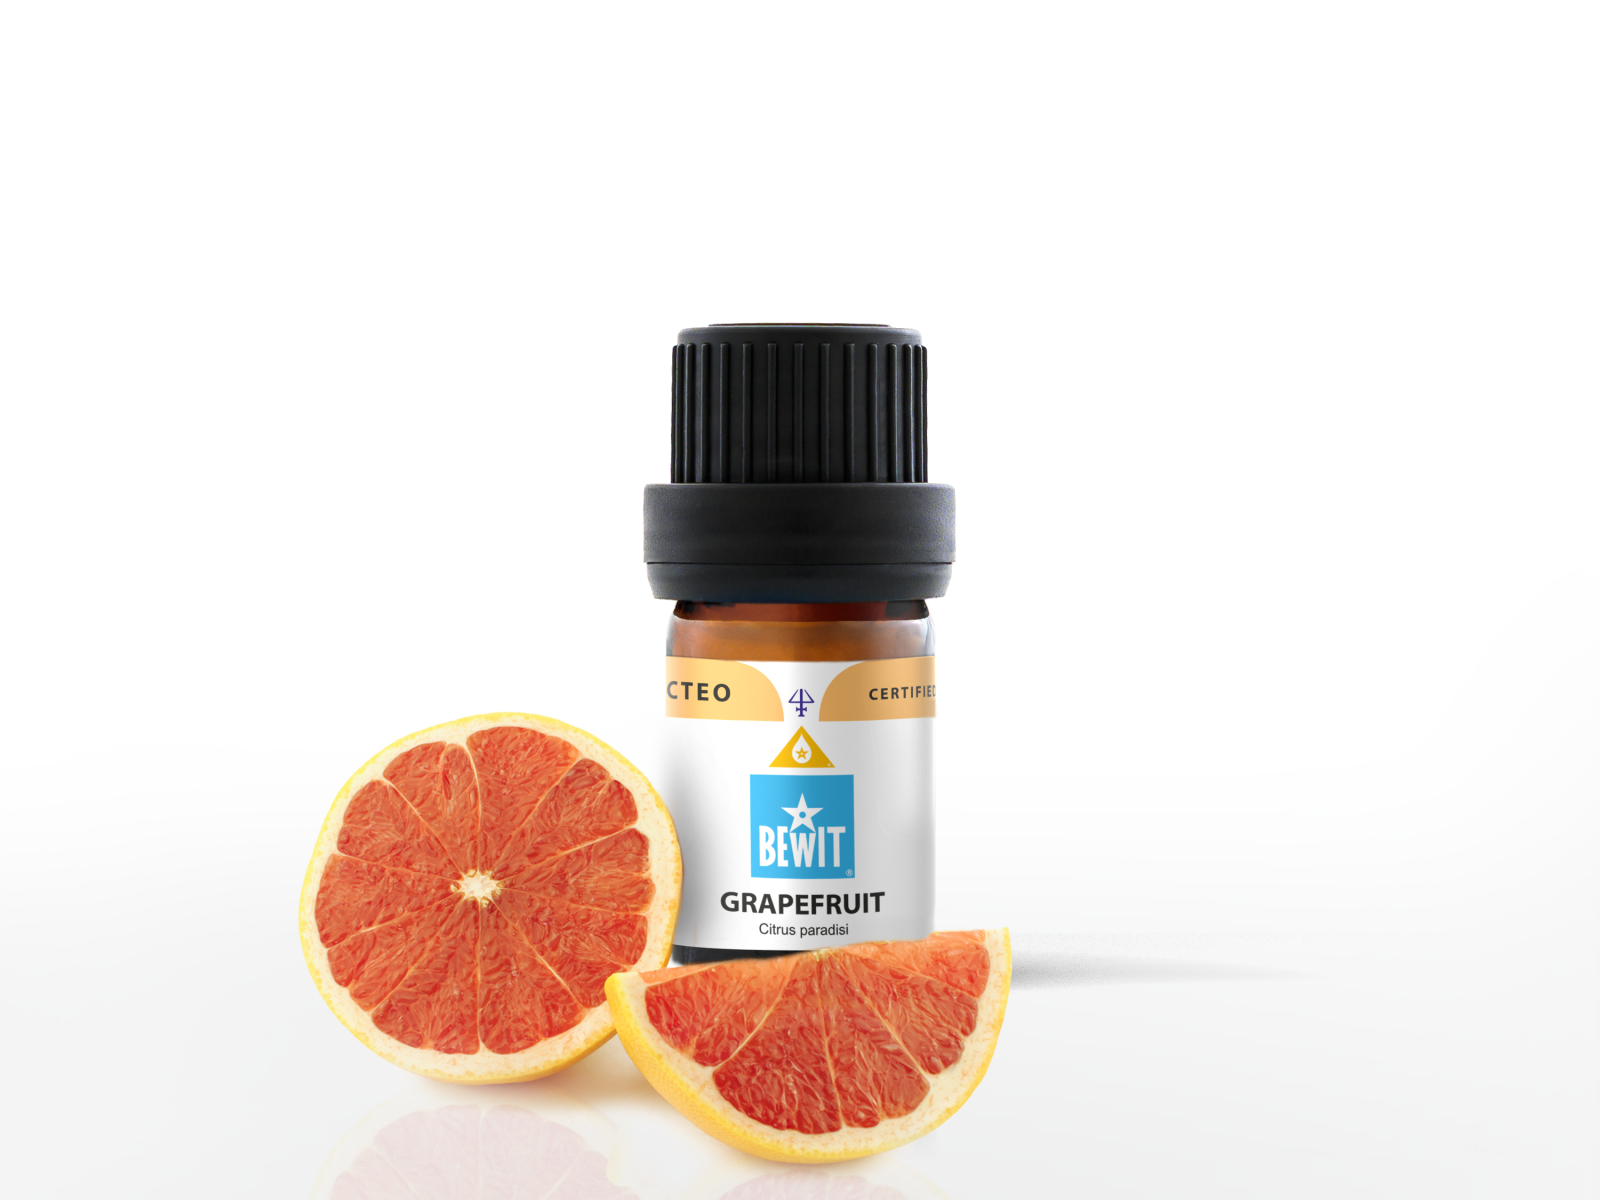 Grapefruit - It is a 100% pure essential oil - 2